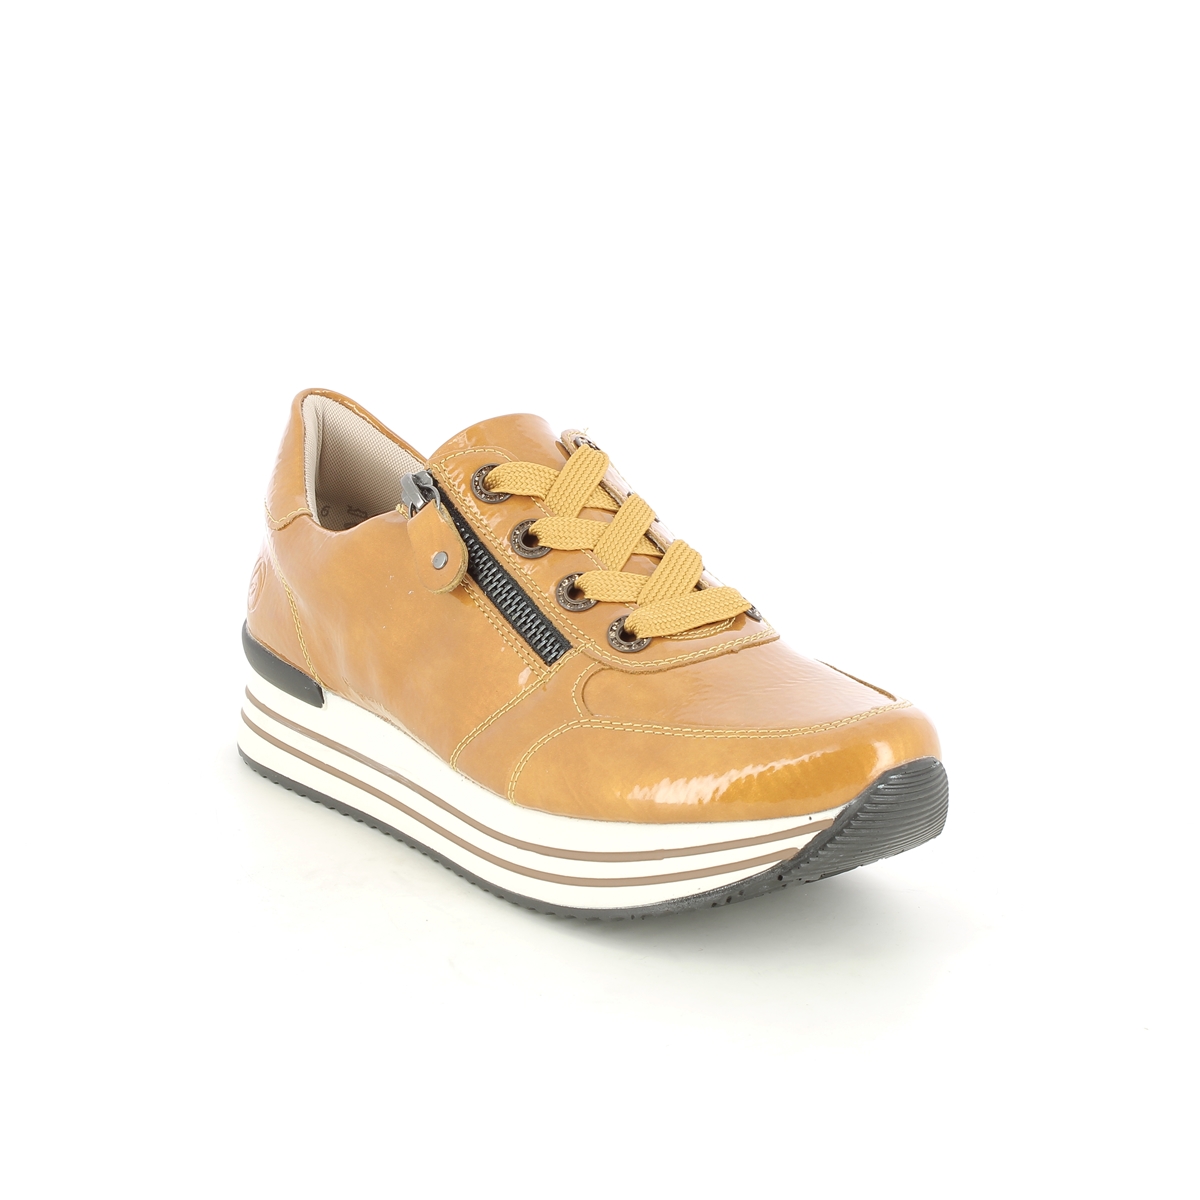 Remonte D1302-69 Ranger 2 Yellow Patent Womens trainers in a Plain Man-made in Size 39